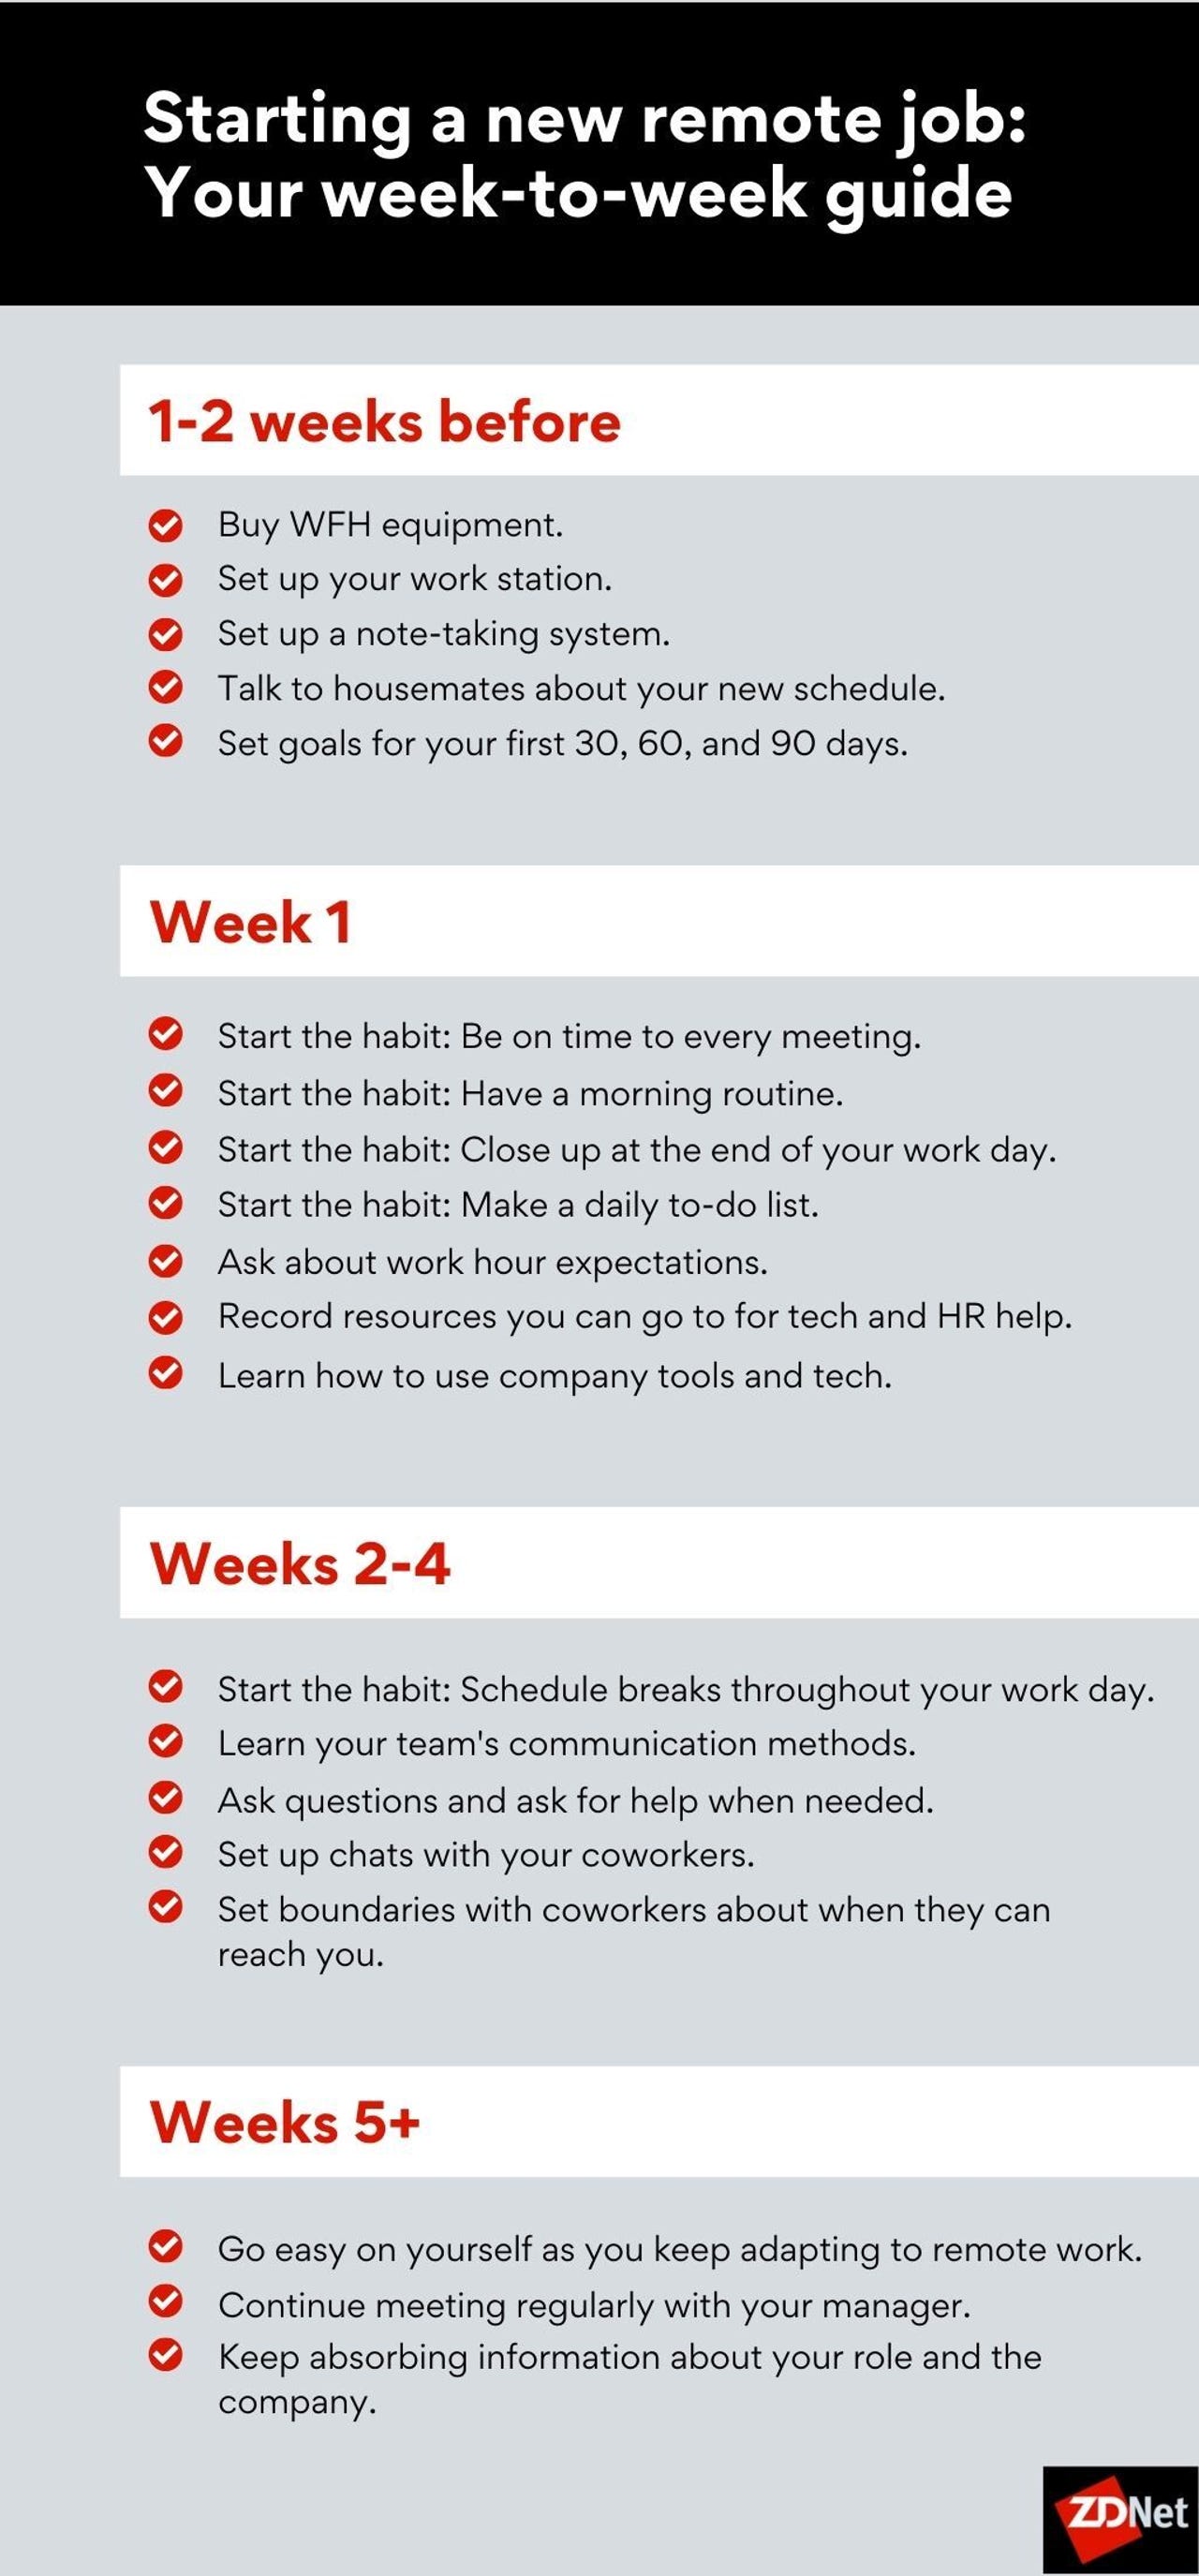 A graphic summarizing this article's headings and subheadings, listing tasks to accomplish each week during a new job.